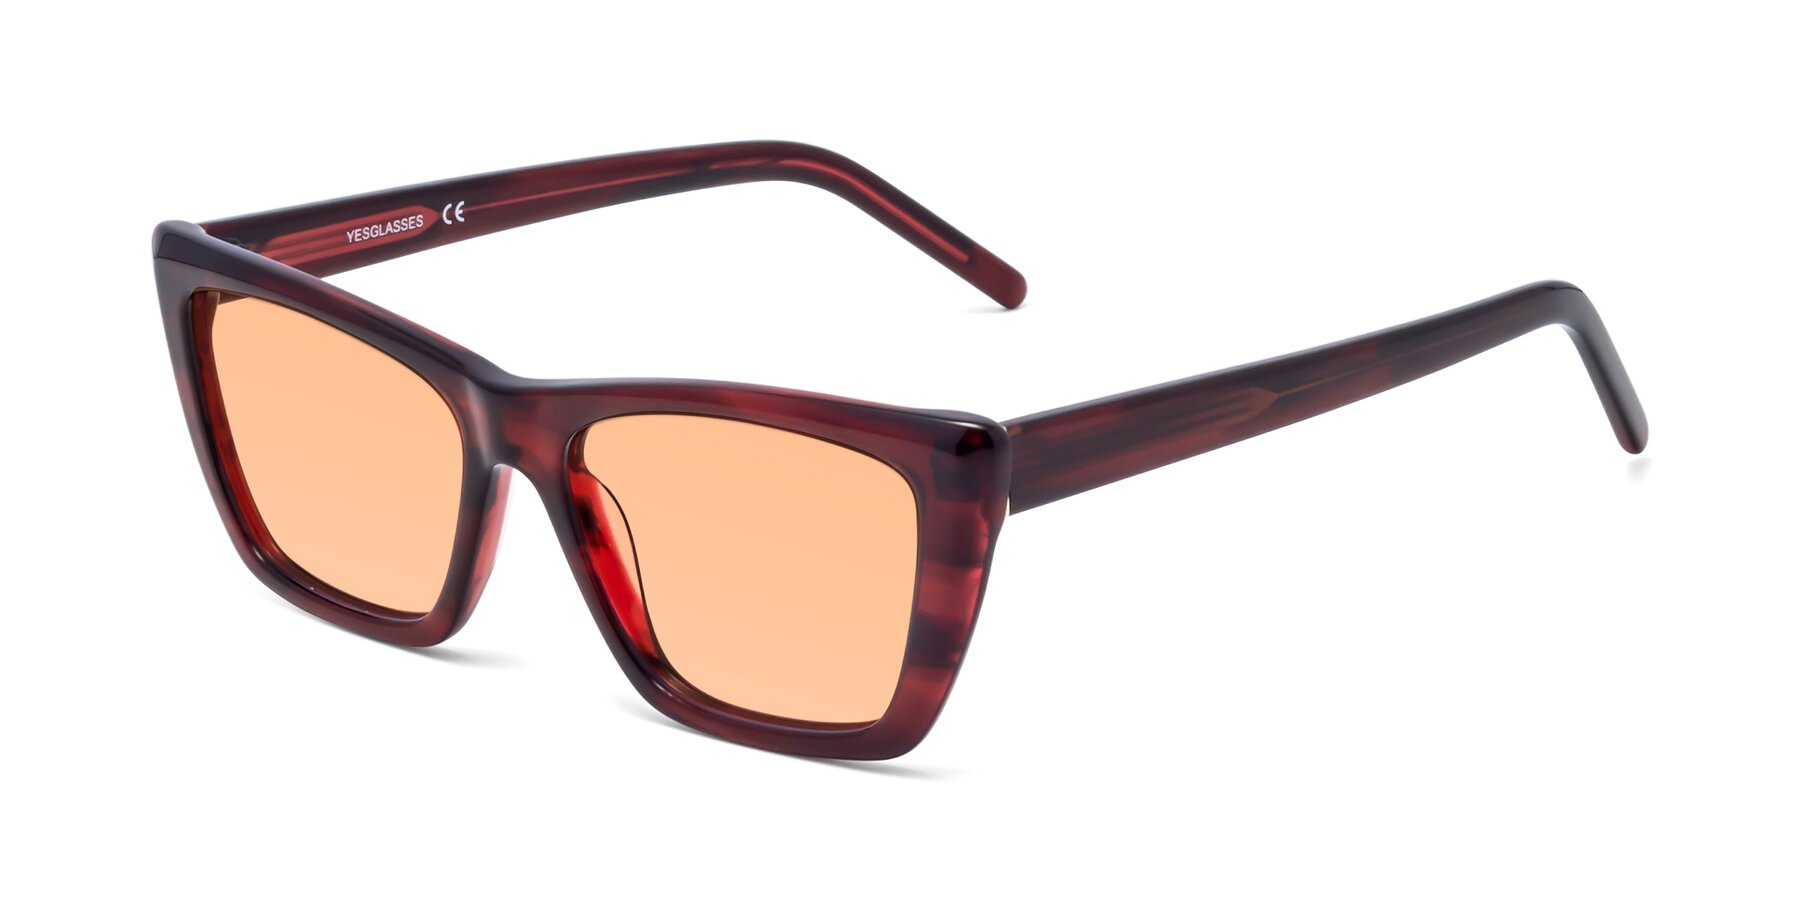 Angle of 1494 in Stripe Wine with Light Orange Tinted Lenses